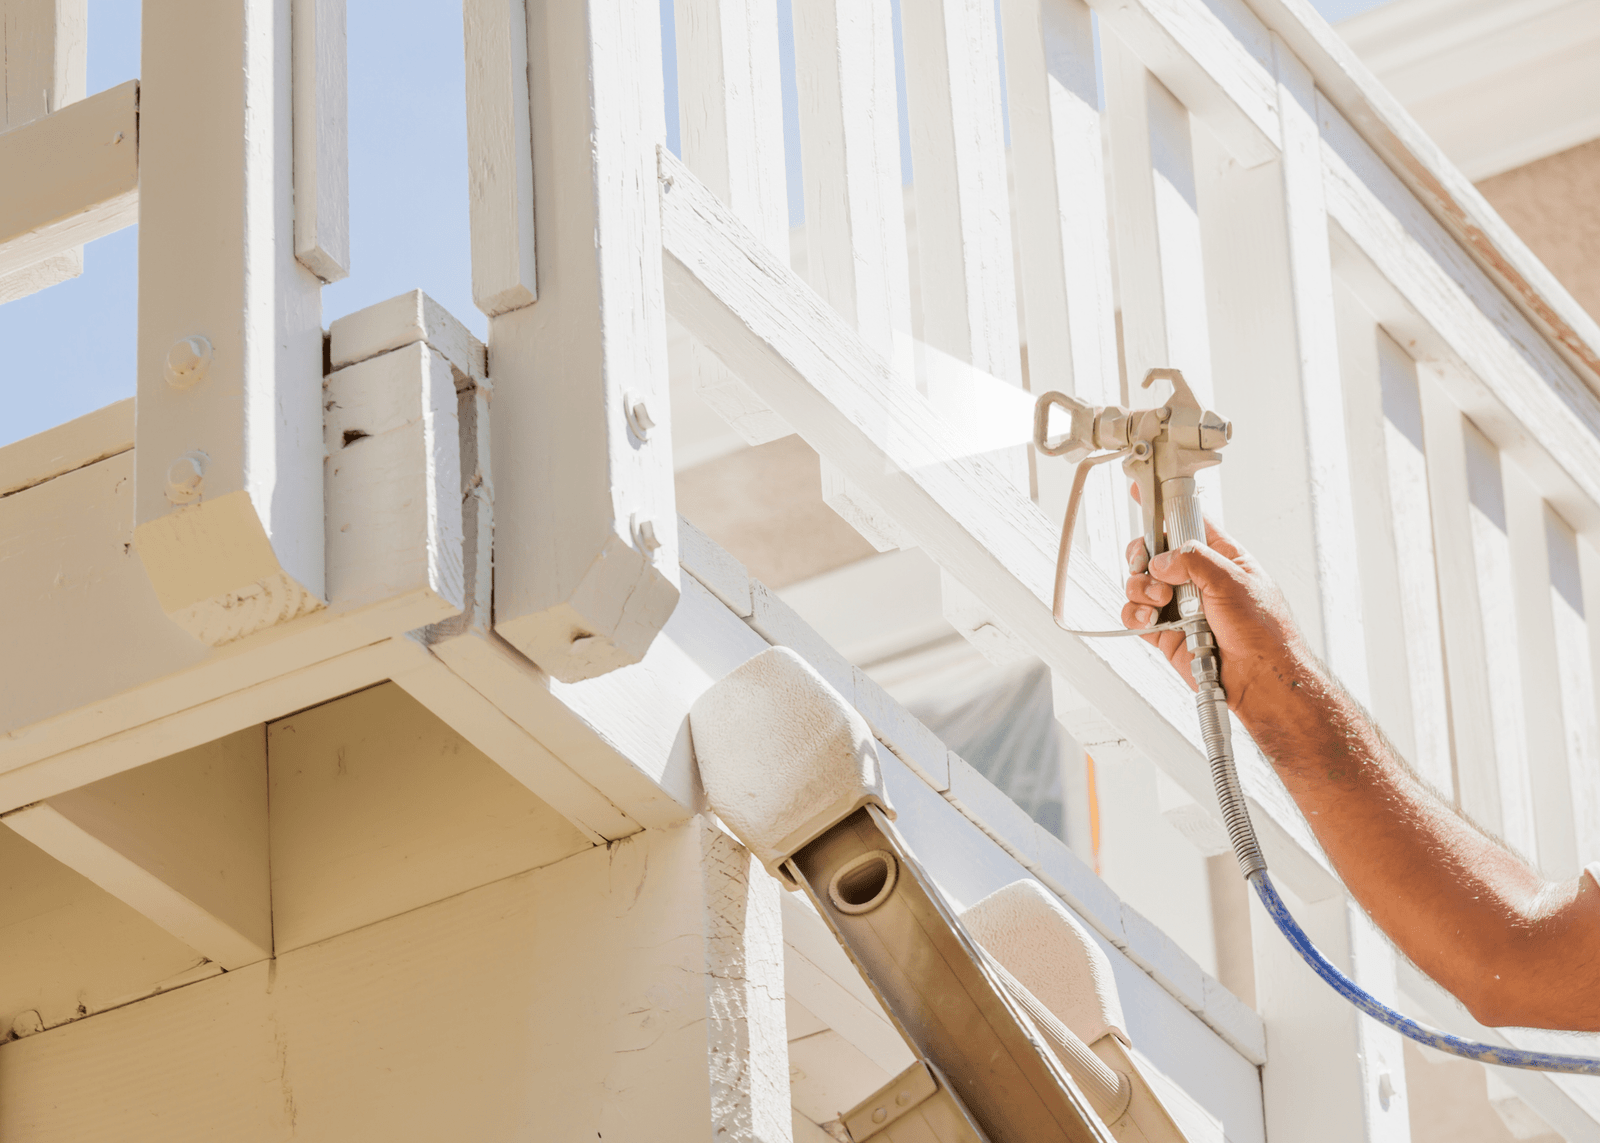 Professional house painter with facial protection spray painting a home deck, offered by Handyman Jax's painting services in Jacksonville, FL.